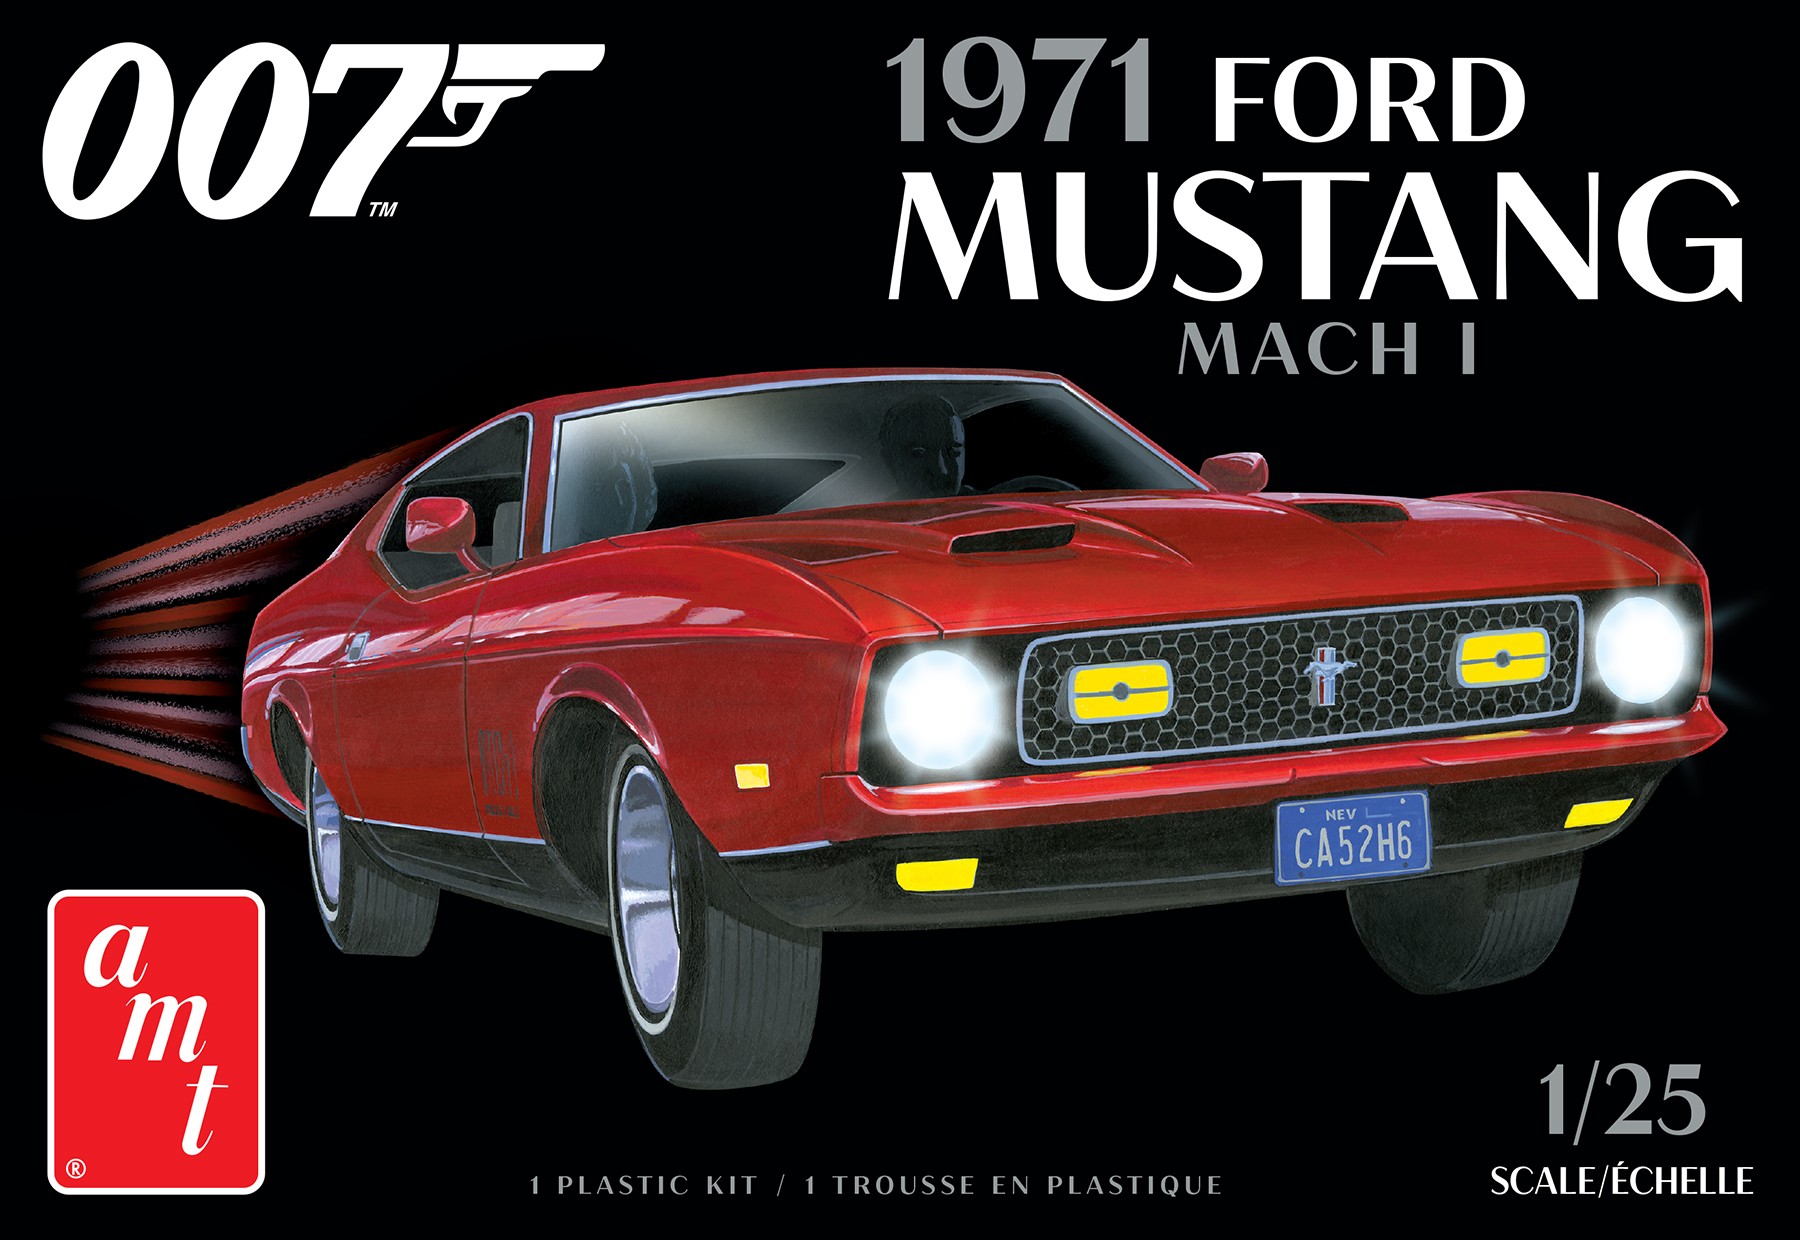 AMT 1187 JAMES BOND FORD MUSTANG MACH I 1971 1:25